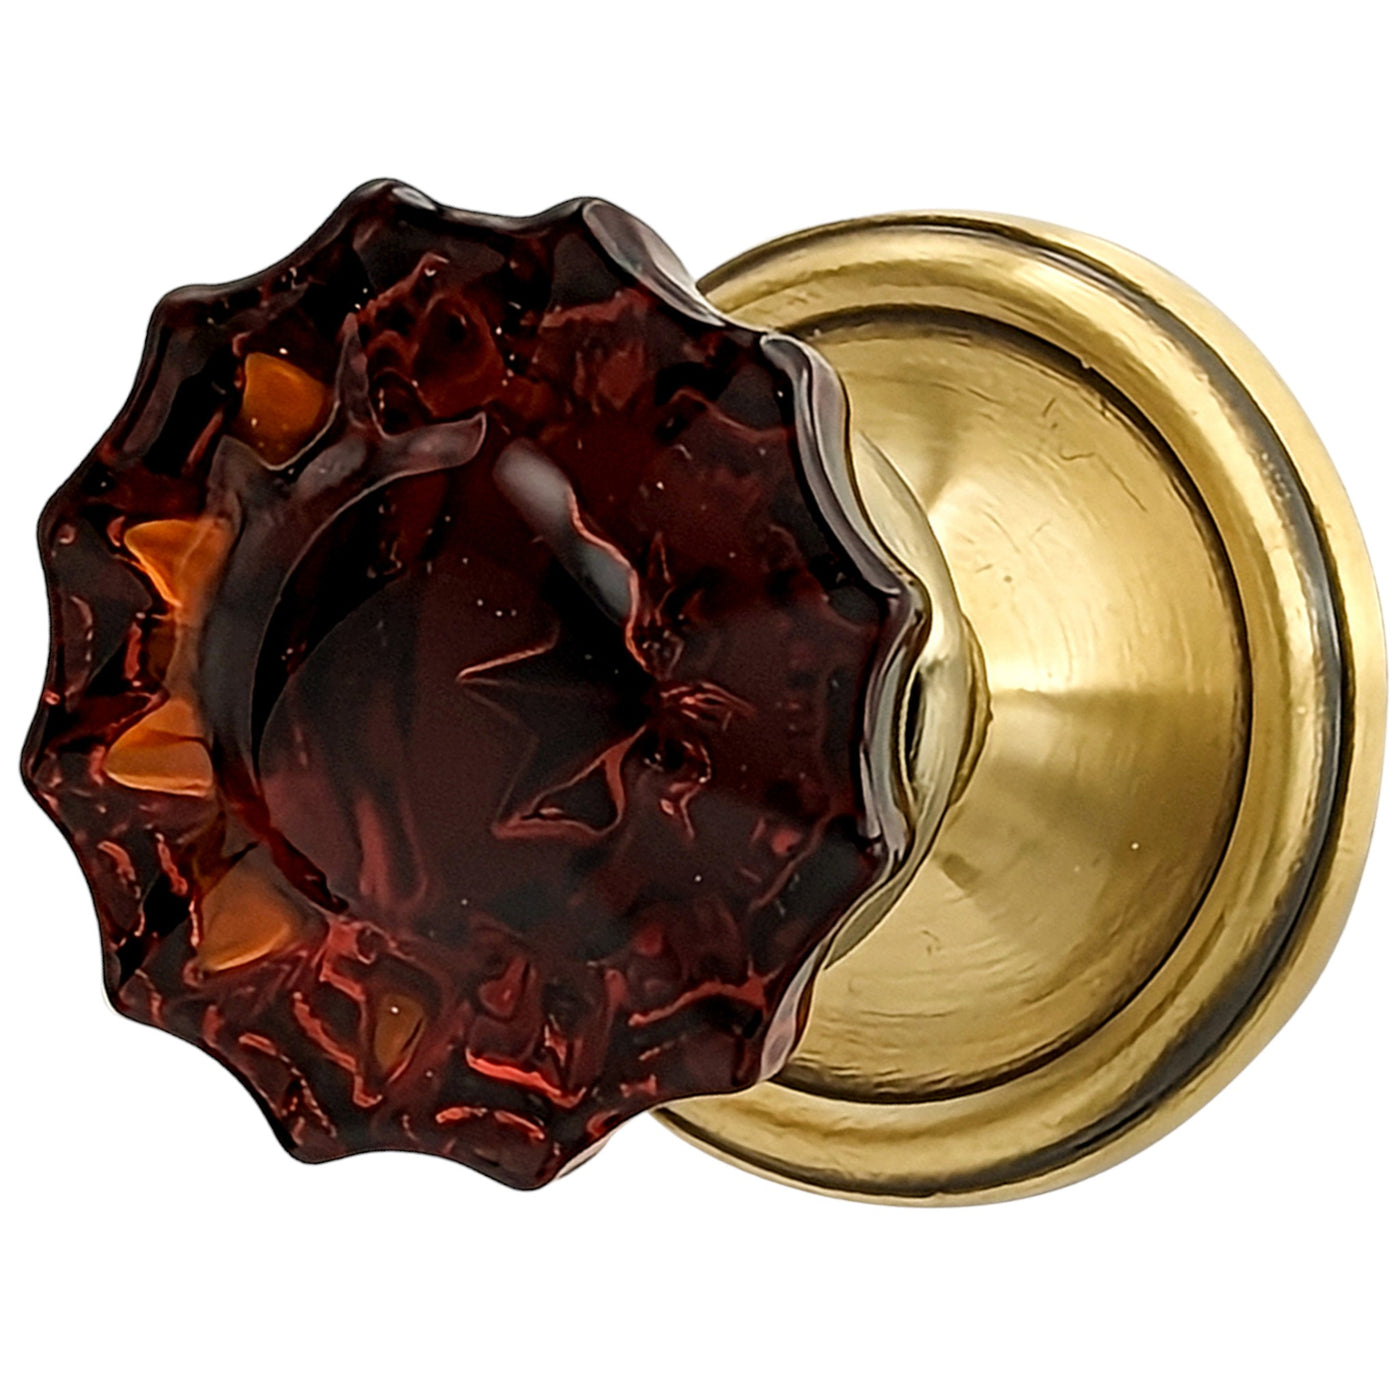 Traditional Rosette Door Set with Fluted Amber Glass Door Knobs (Several Finishes Available)